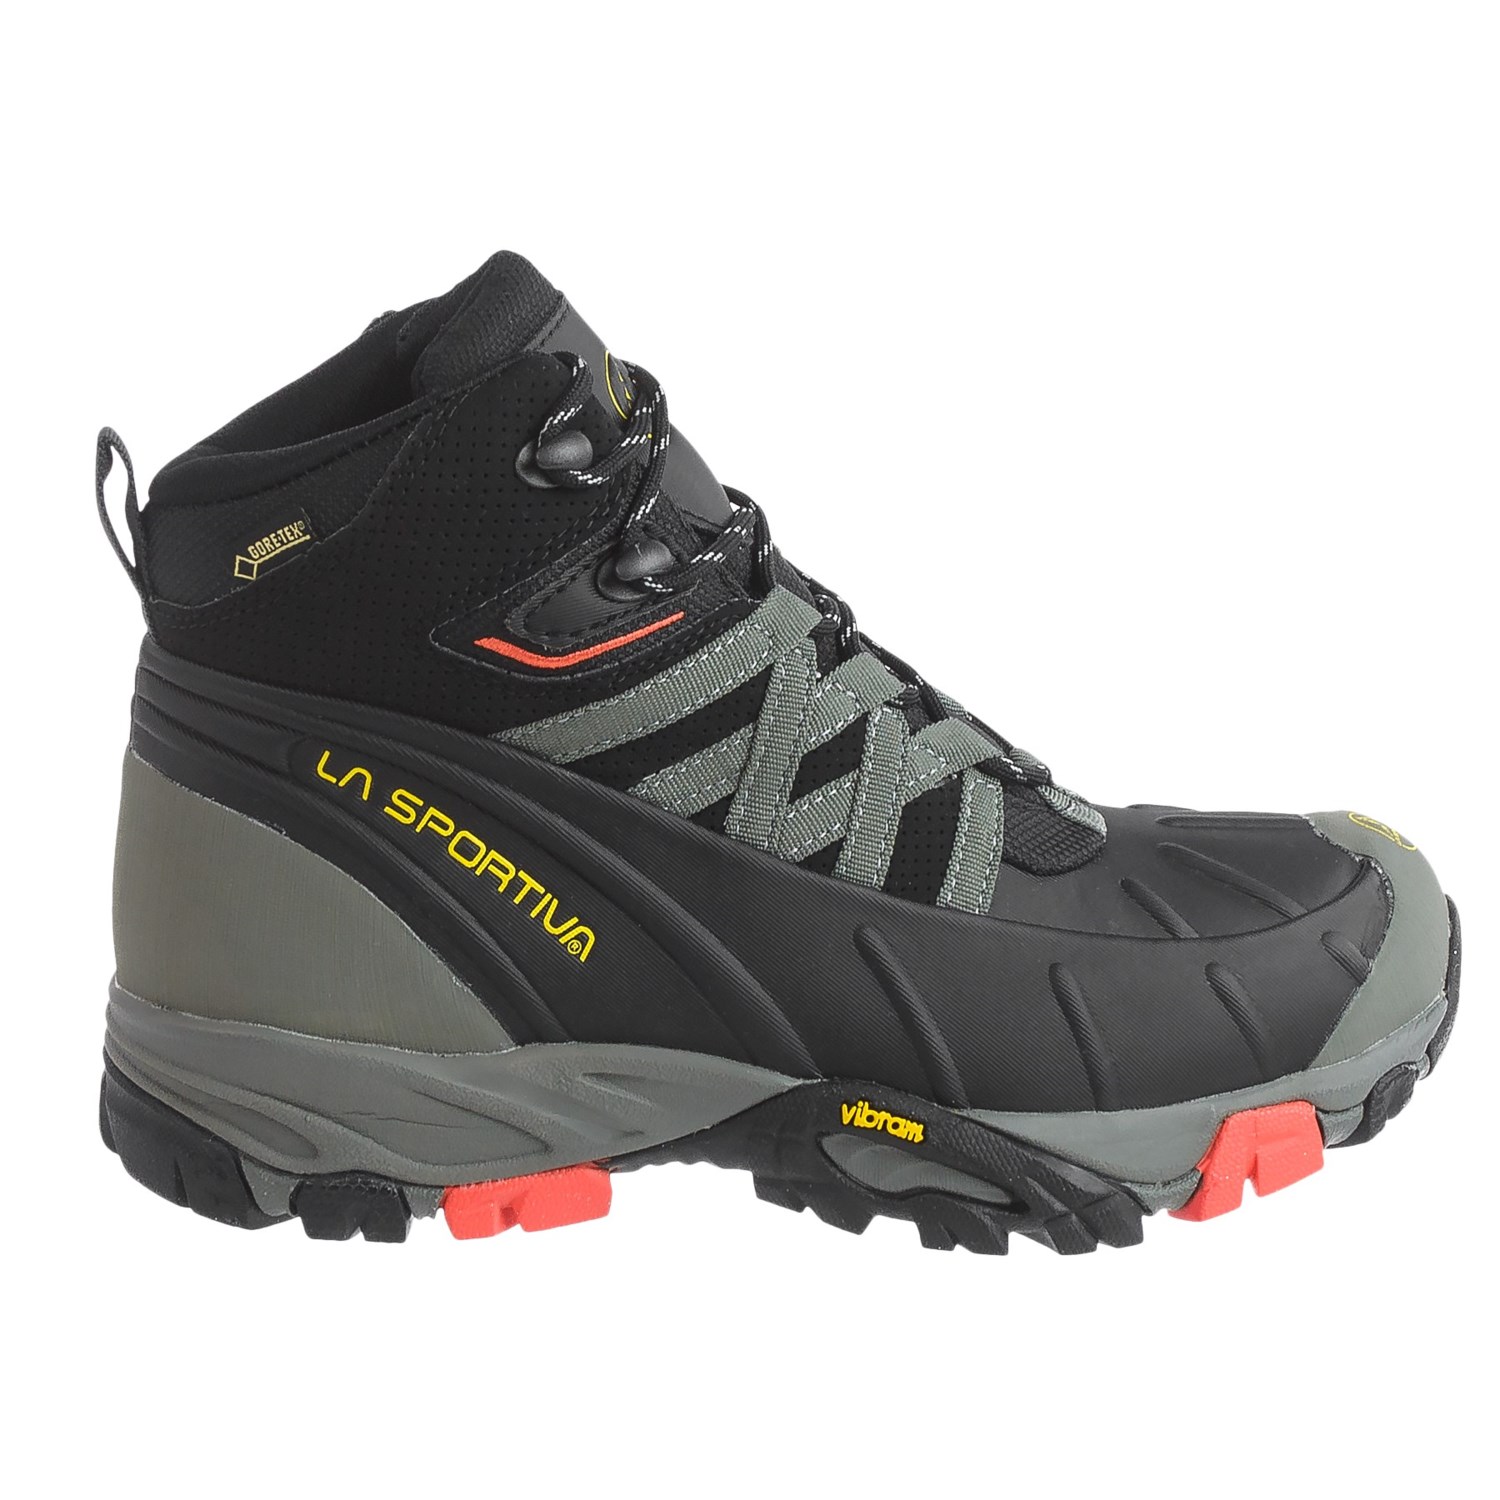 La Sportiva Frost Gore-Tex® Hiking Boots (For Women) - Save 60%